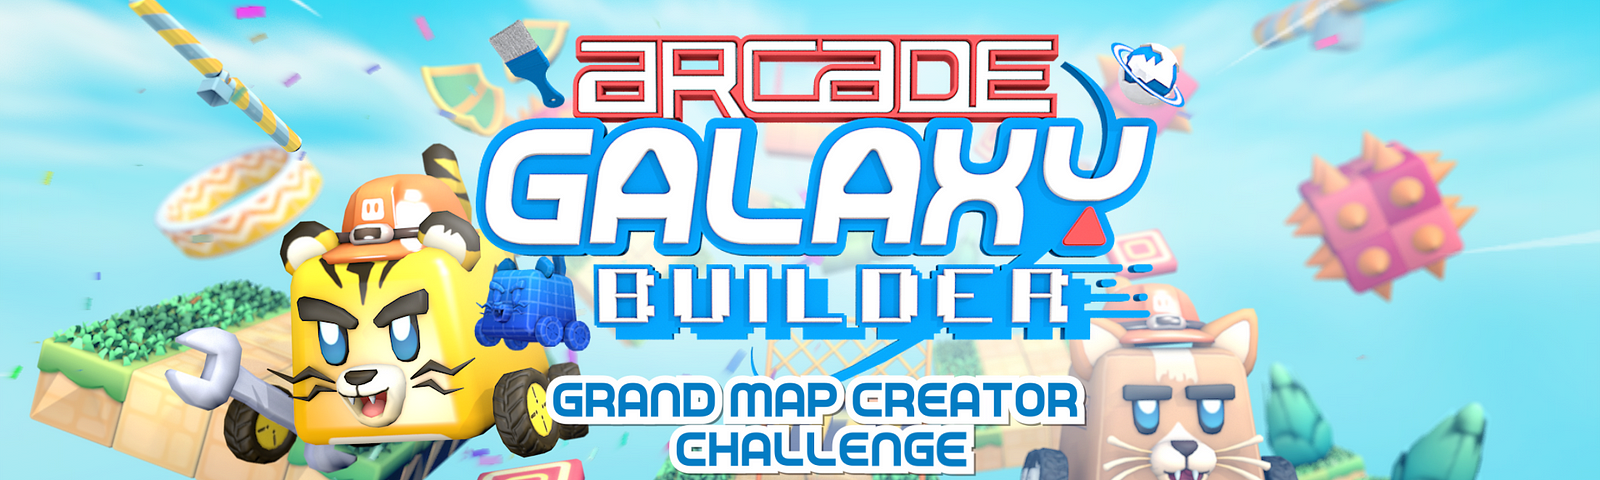 Join the Arcade Galaxy Builder Early Access for rewards during the Grand Map Creator Challenge!